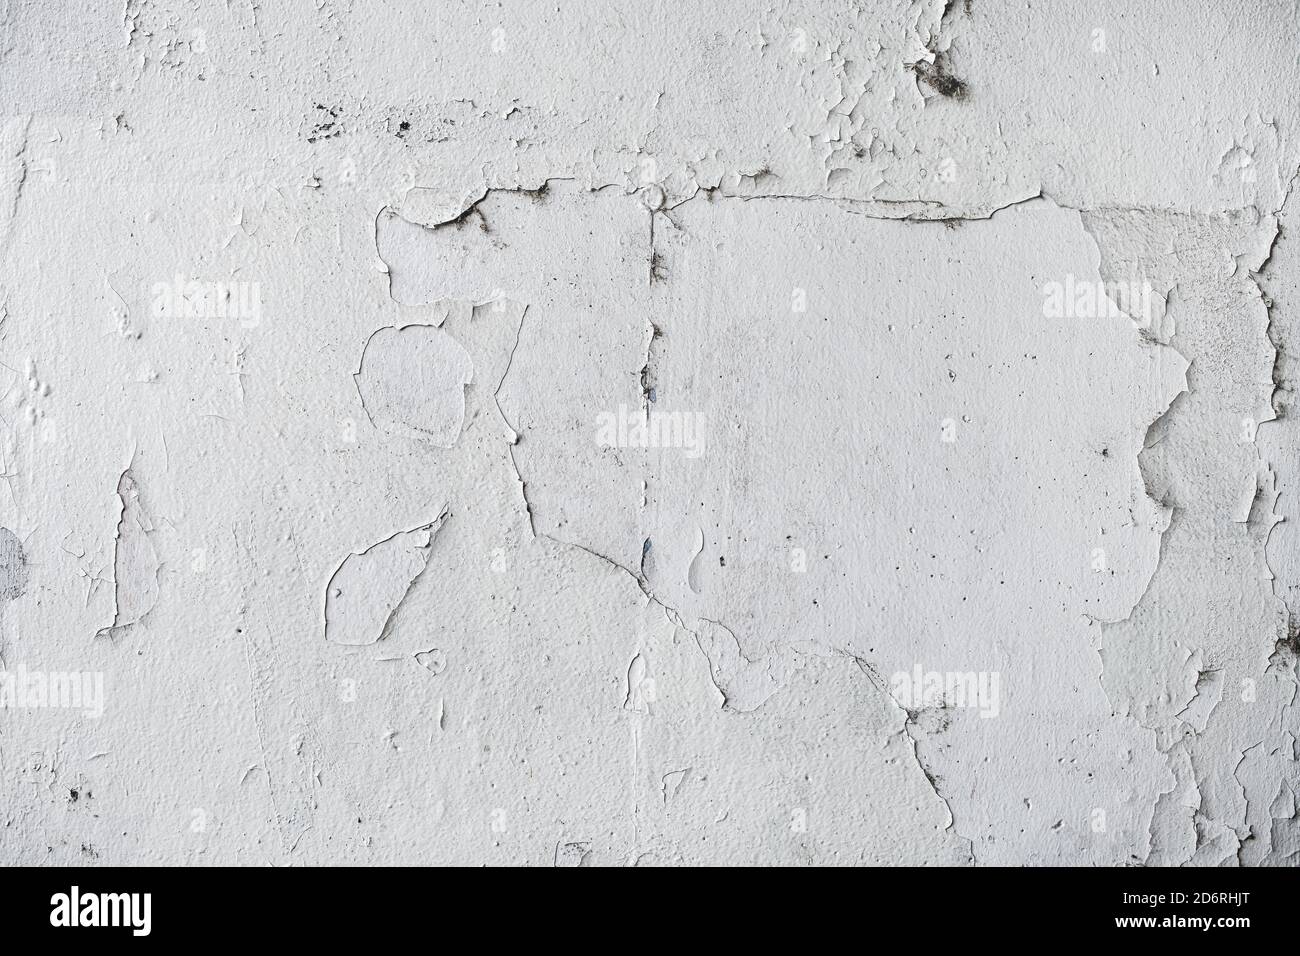 Grunge white texture of weathered wall with paint peeling off the surface, worn facade pattern as background Stock Photo